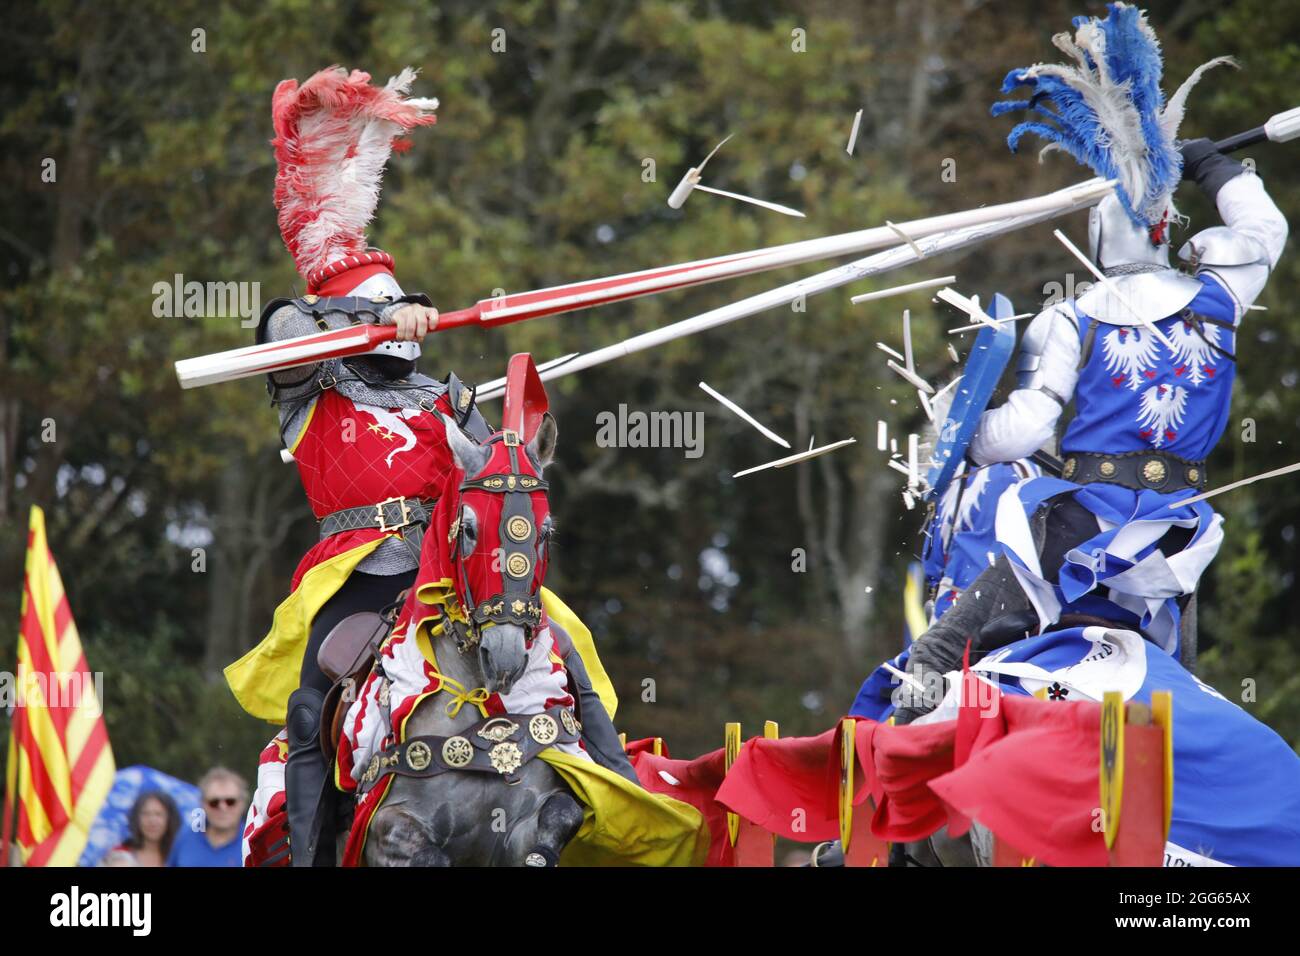 Herstmonceux,UK. 29th Aug 2021.  England's medieval festival continues today with a Knights tournament and jousting from the spectacular Pferdestunt company.The festival runs over the bank holiday weekend & attracts thousands of visitors interested in everything medieval. Credit: Ed Brown/Alamy Live News Stock Photo